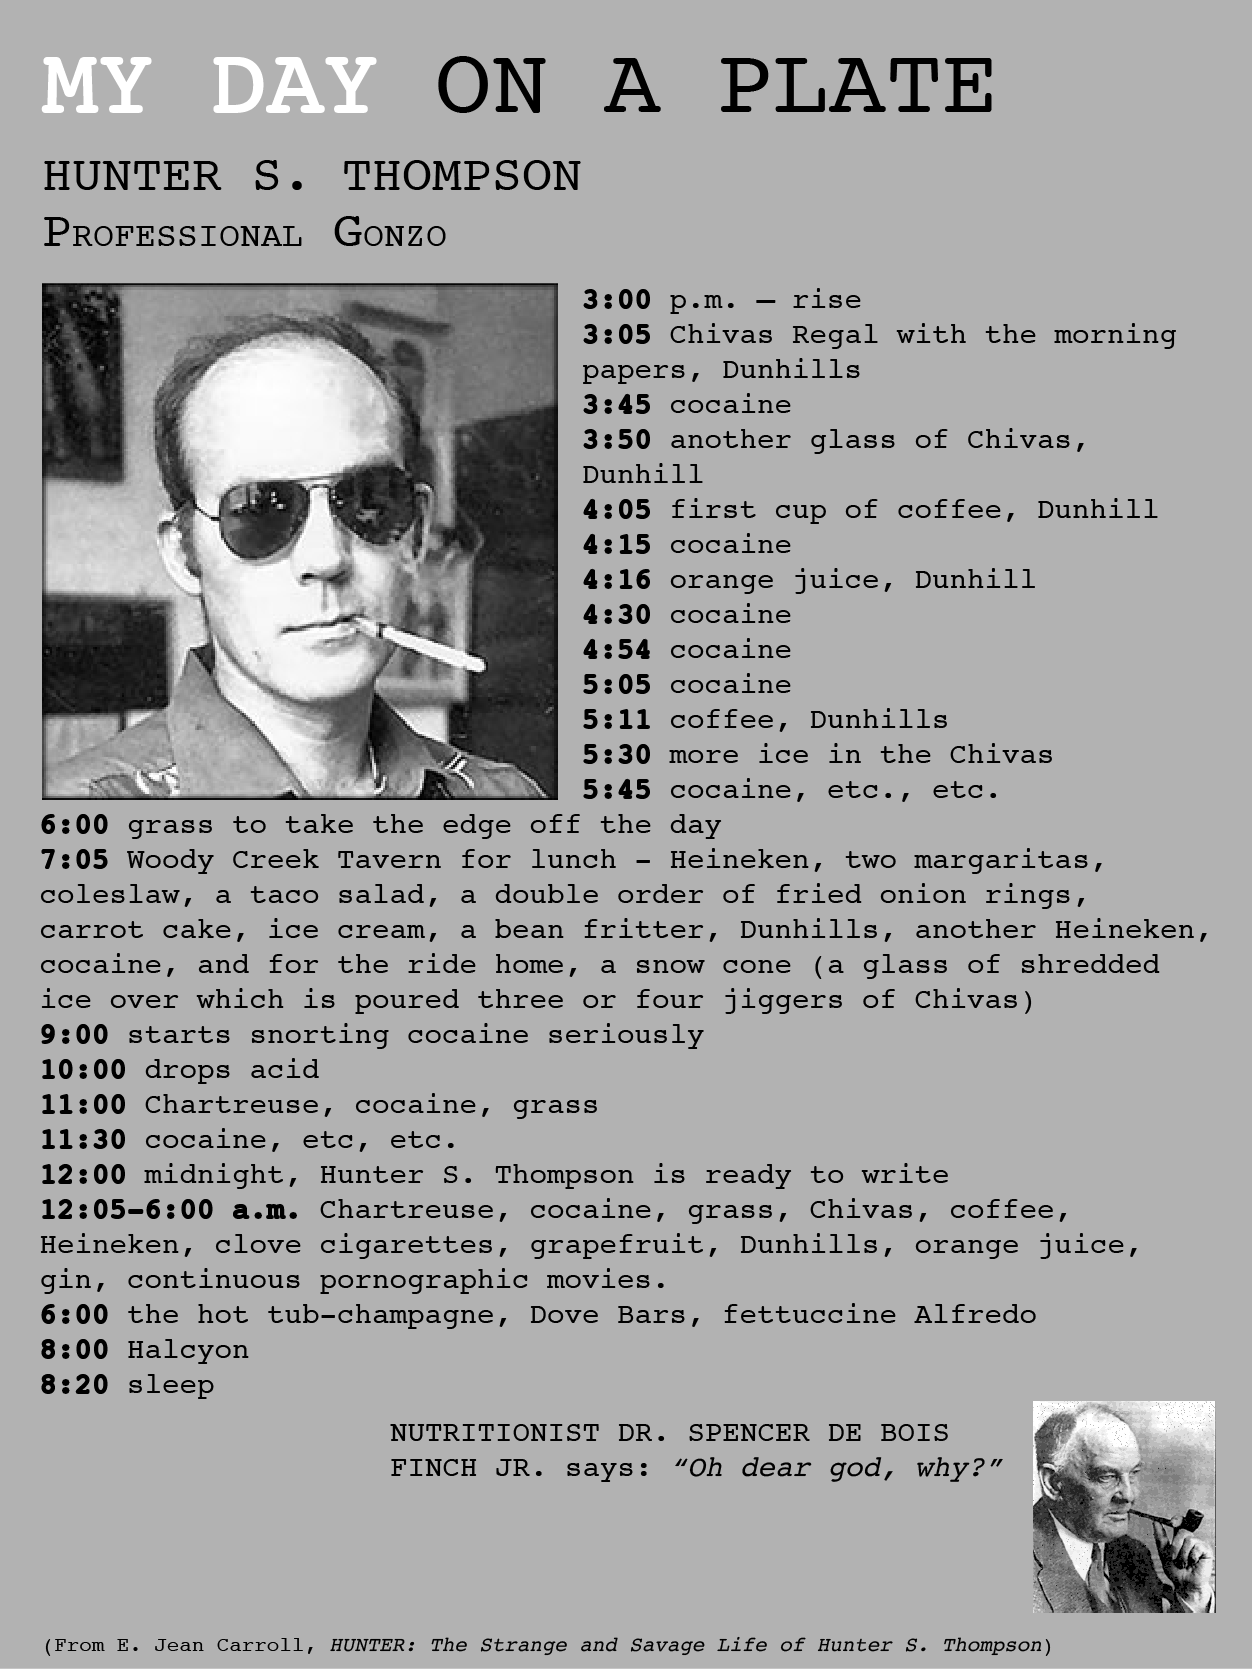 20 Great Articles by Hunter S. Thompson